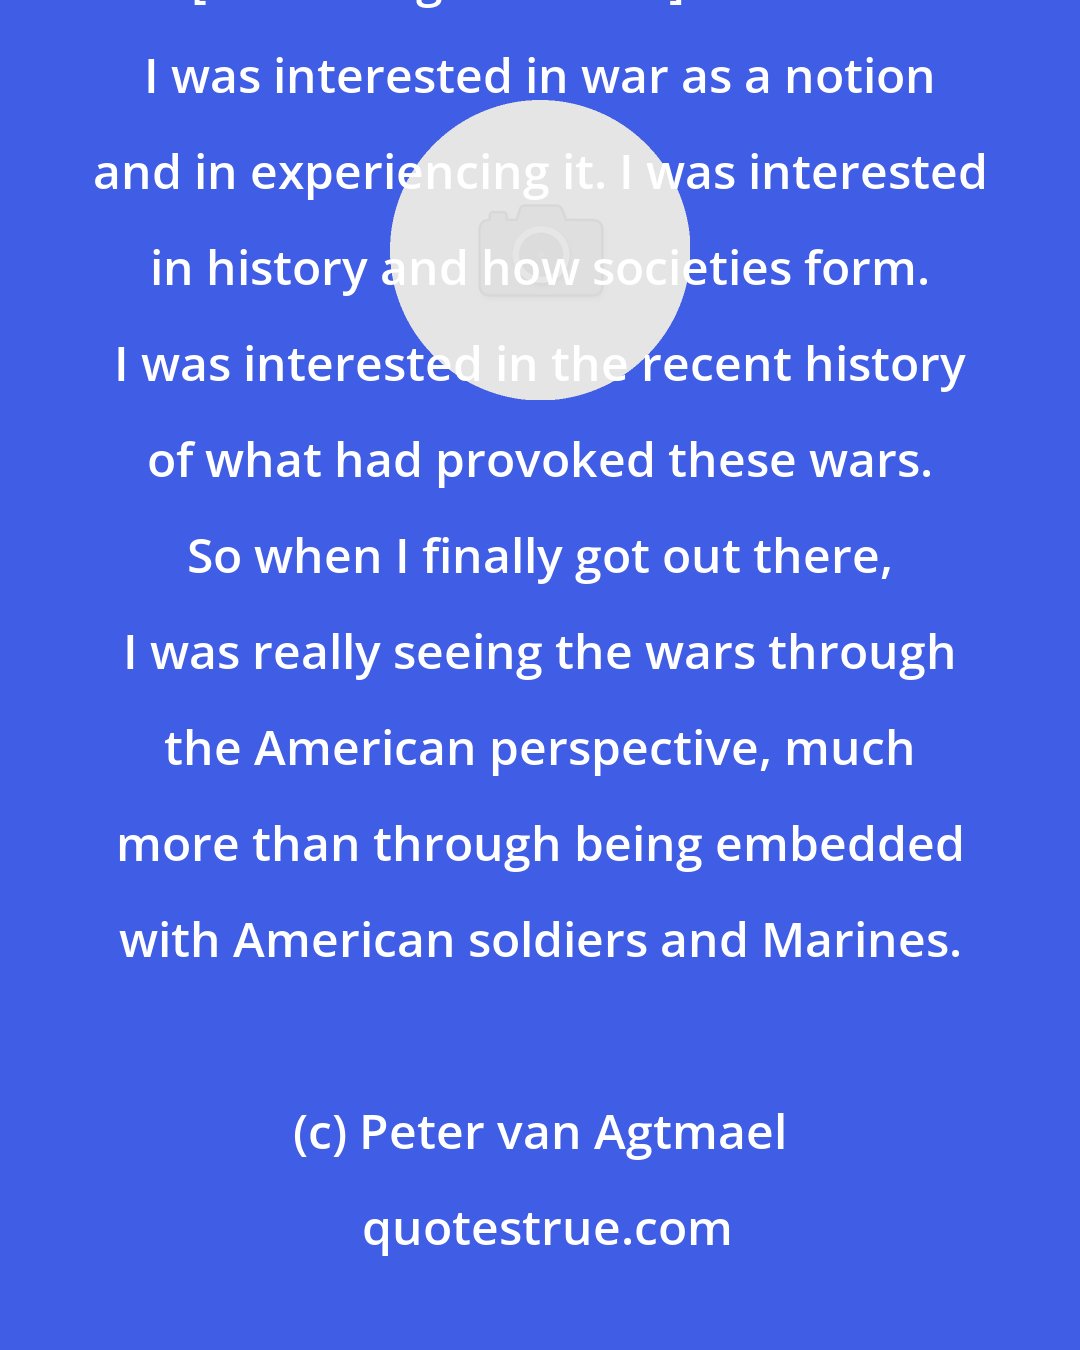 Peter van Agtmael: I went out to cover the wars in Iraq and Afghanistan fundamentally [in Buzzing at the Sill] because I was interested in war as a notion and in experiencing it. I was interested in history and how societies form. I was interested in the recent history of what had provoked these wars. So when I finally got out there, I was really seeing the wars through the American perspective, much more than through being embedded with American soldiers and Marines.